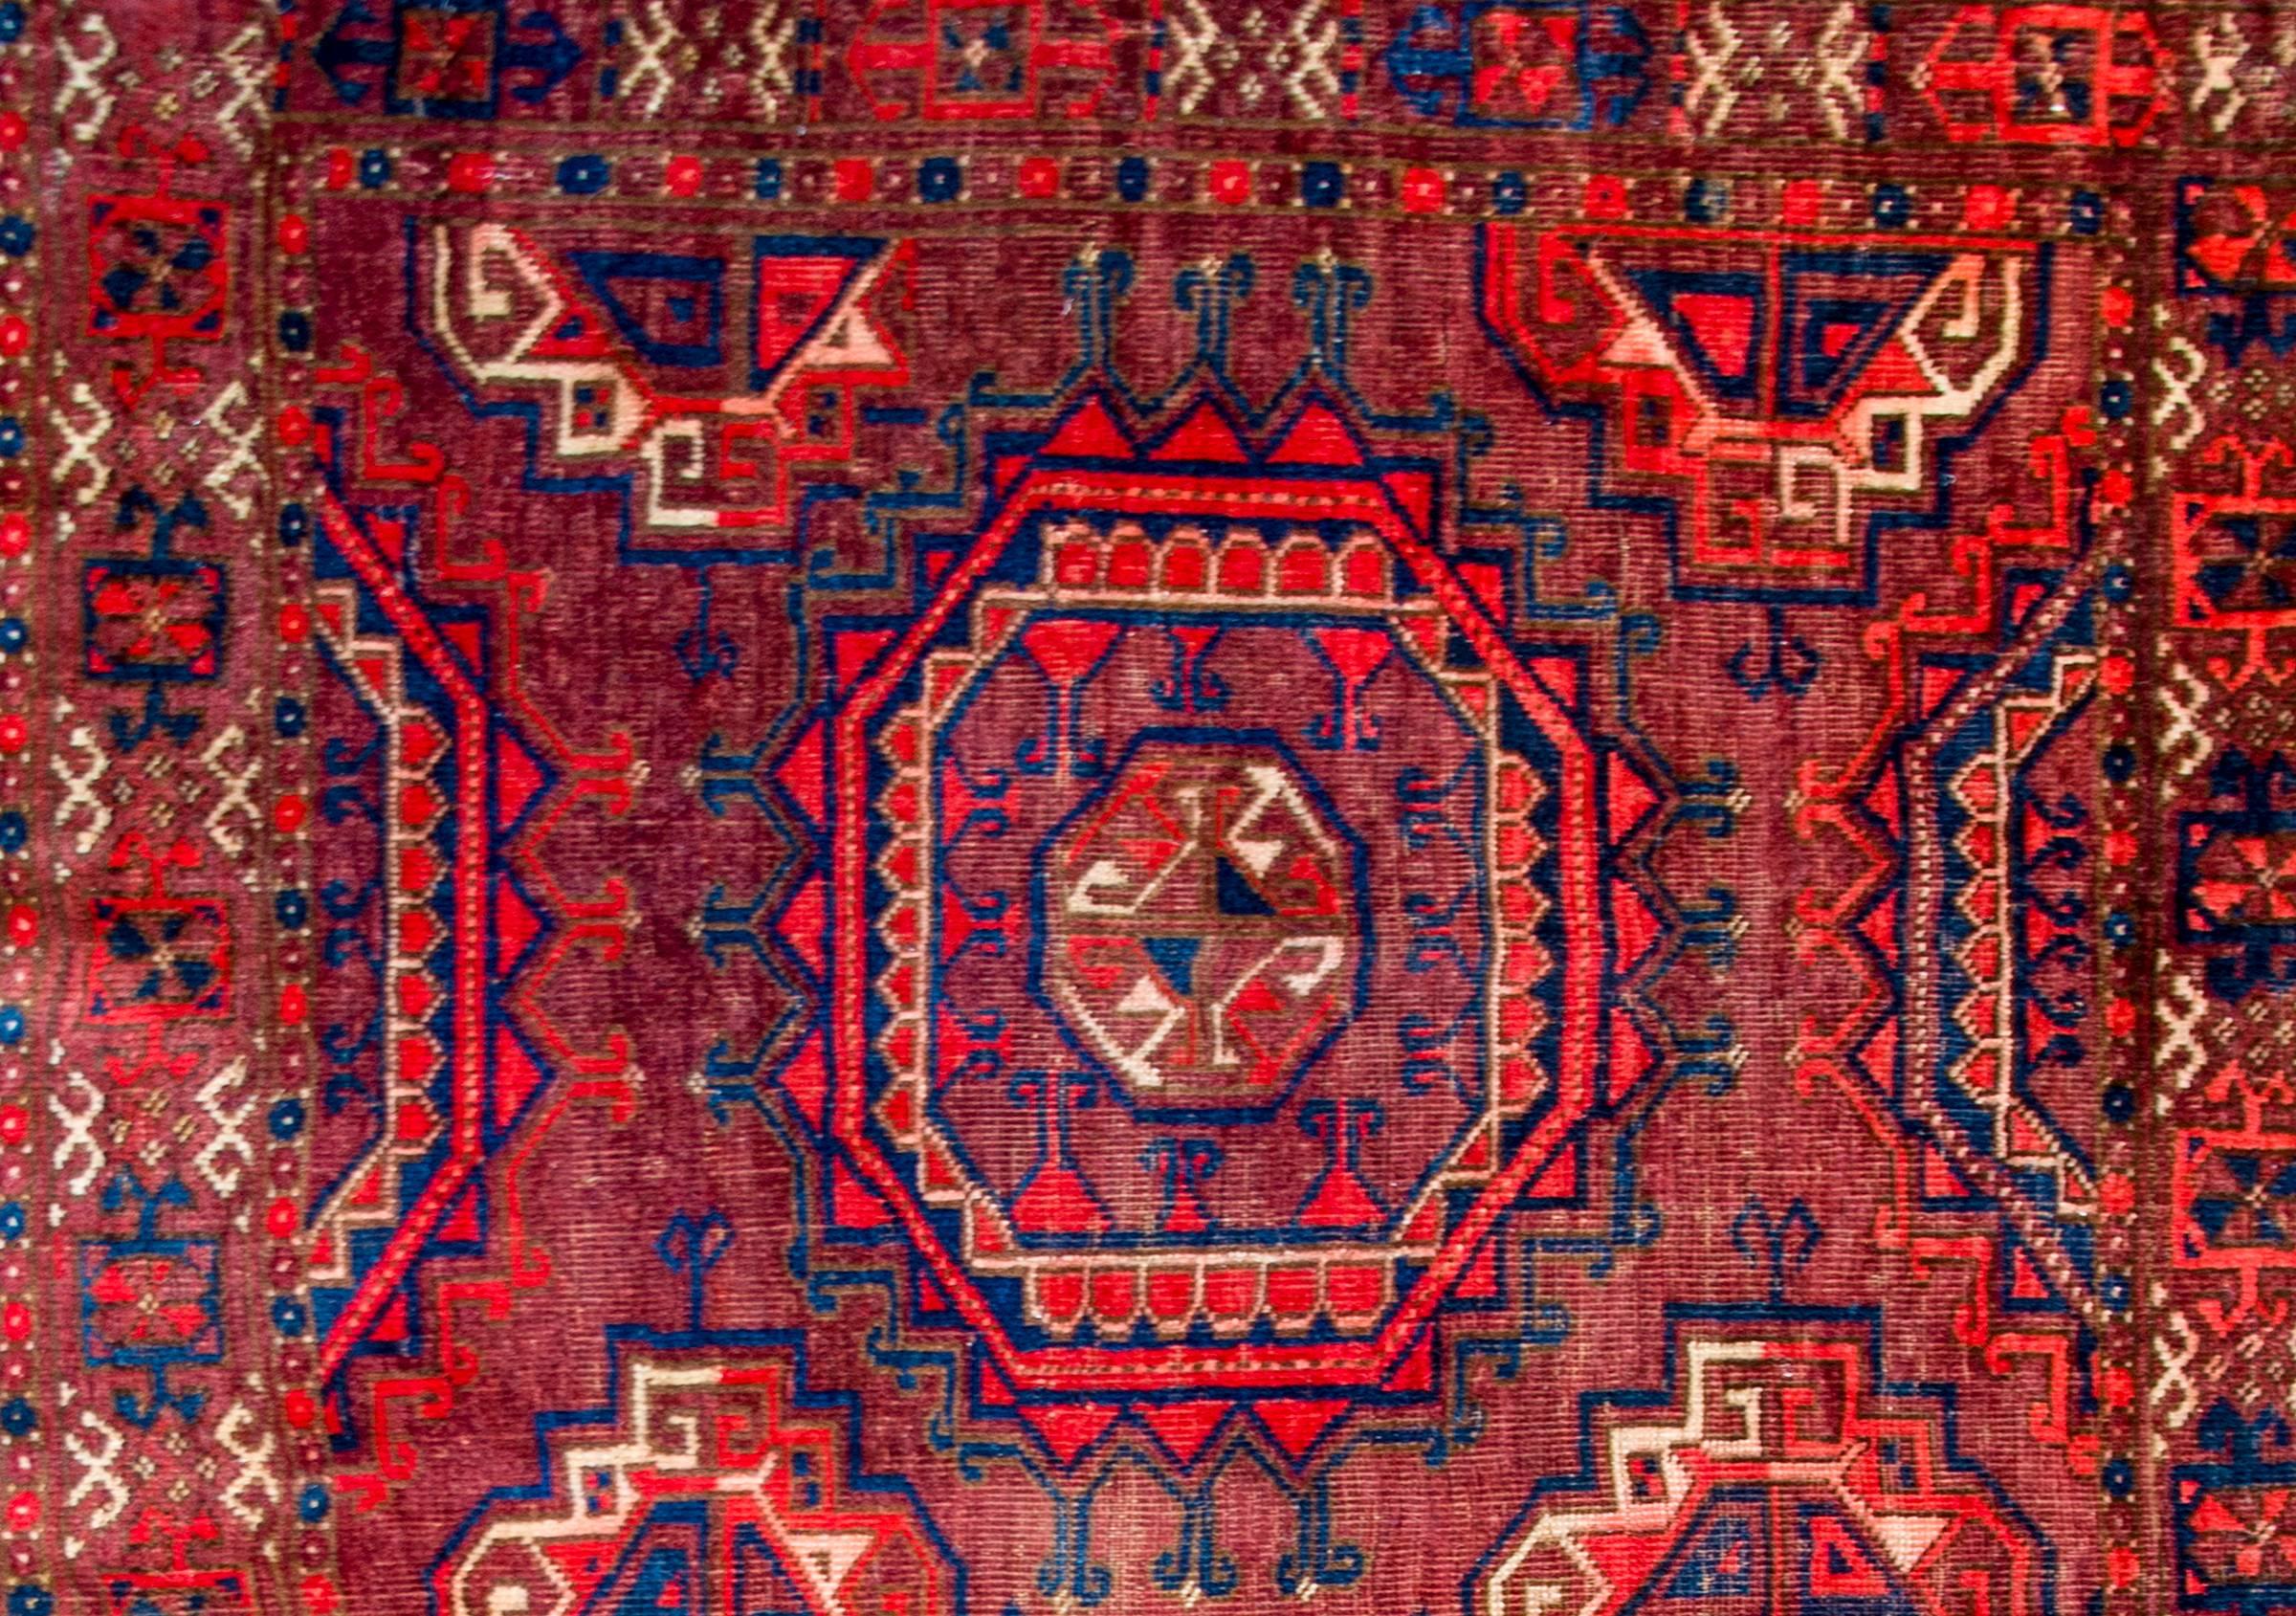 Early 20th century Turkmen Juval bag face with a beautiful pattern containing two large-scale octagonal medallions amidst a field of smaller octagonal medallions all woven in crimon, white, and light and dark indigo, on a crimson background. The